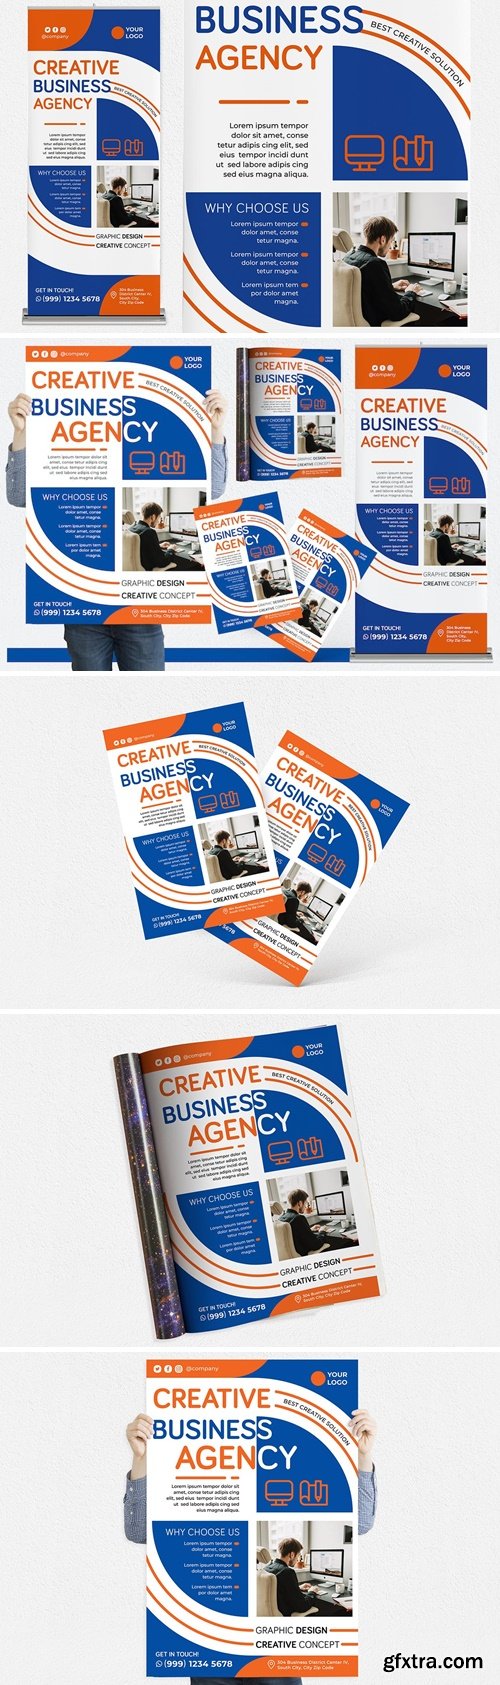 Creative Agency #02 Print Templates Pack RX4PS99